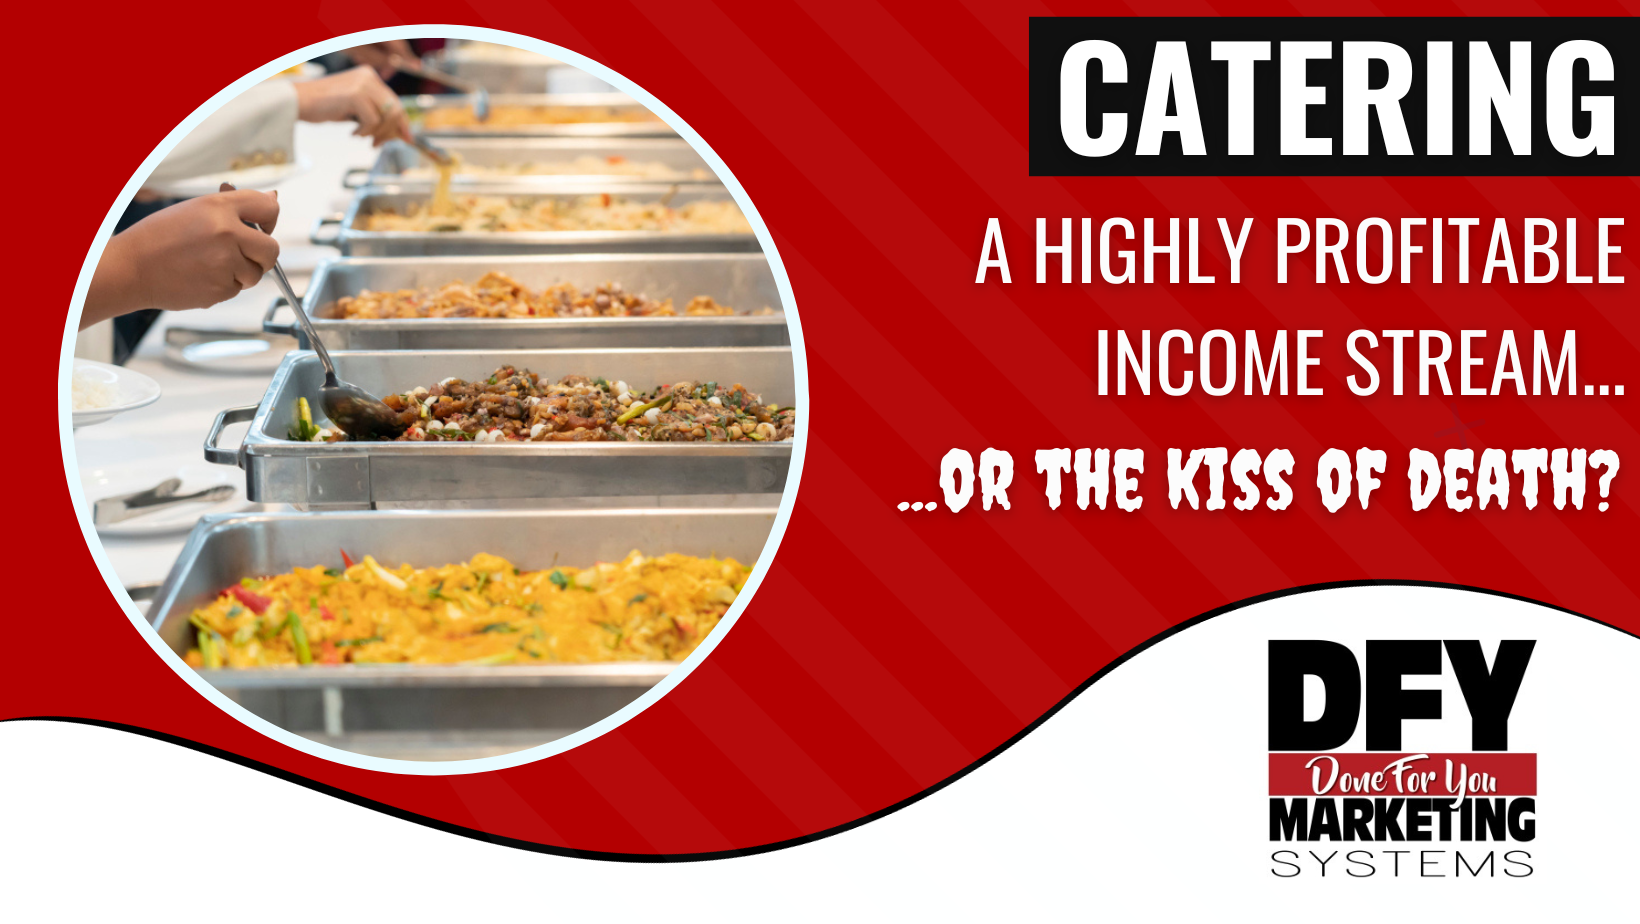 Catering: A Highly Profitable Income Stream…Or The Kiss Of Death?